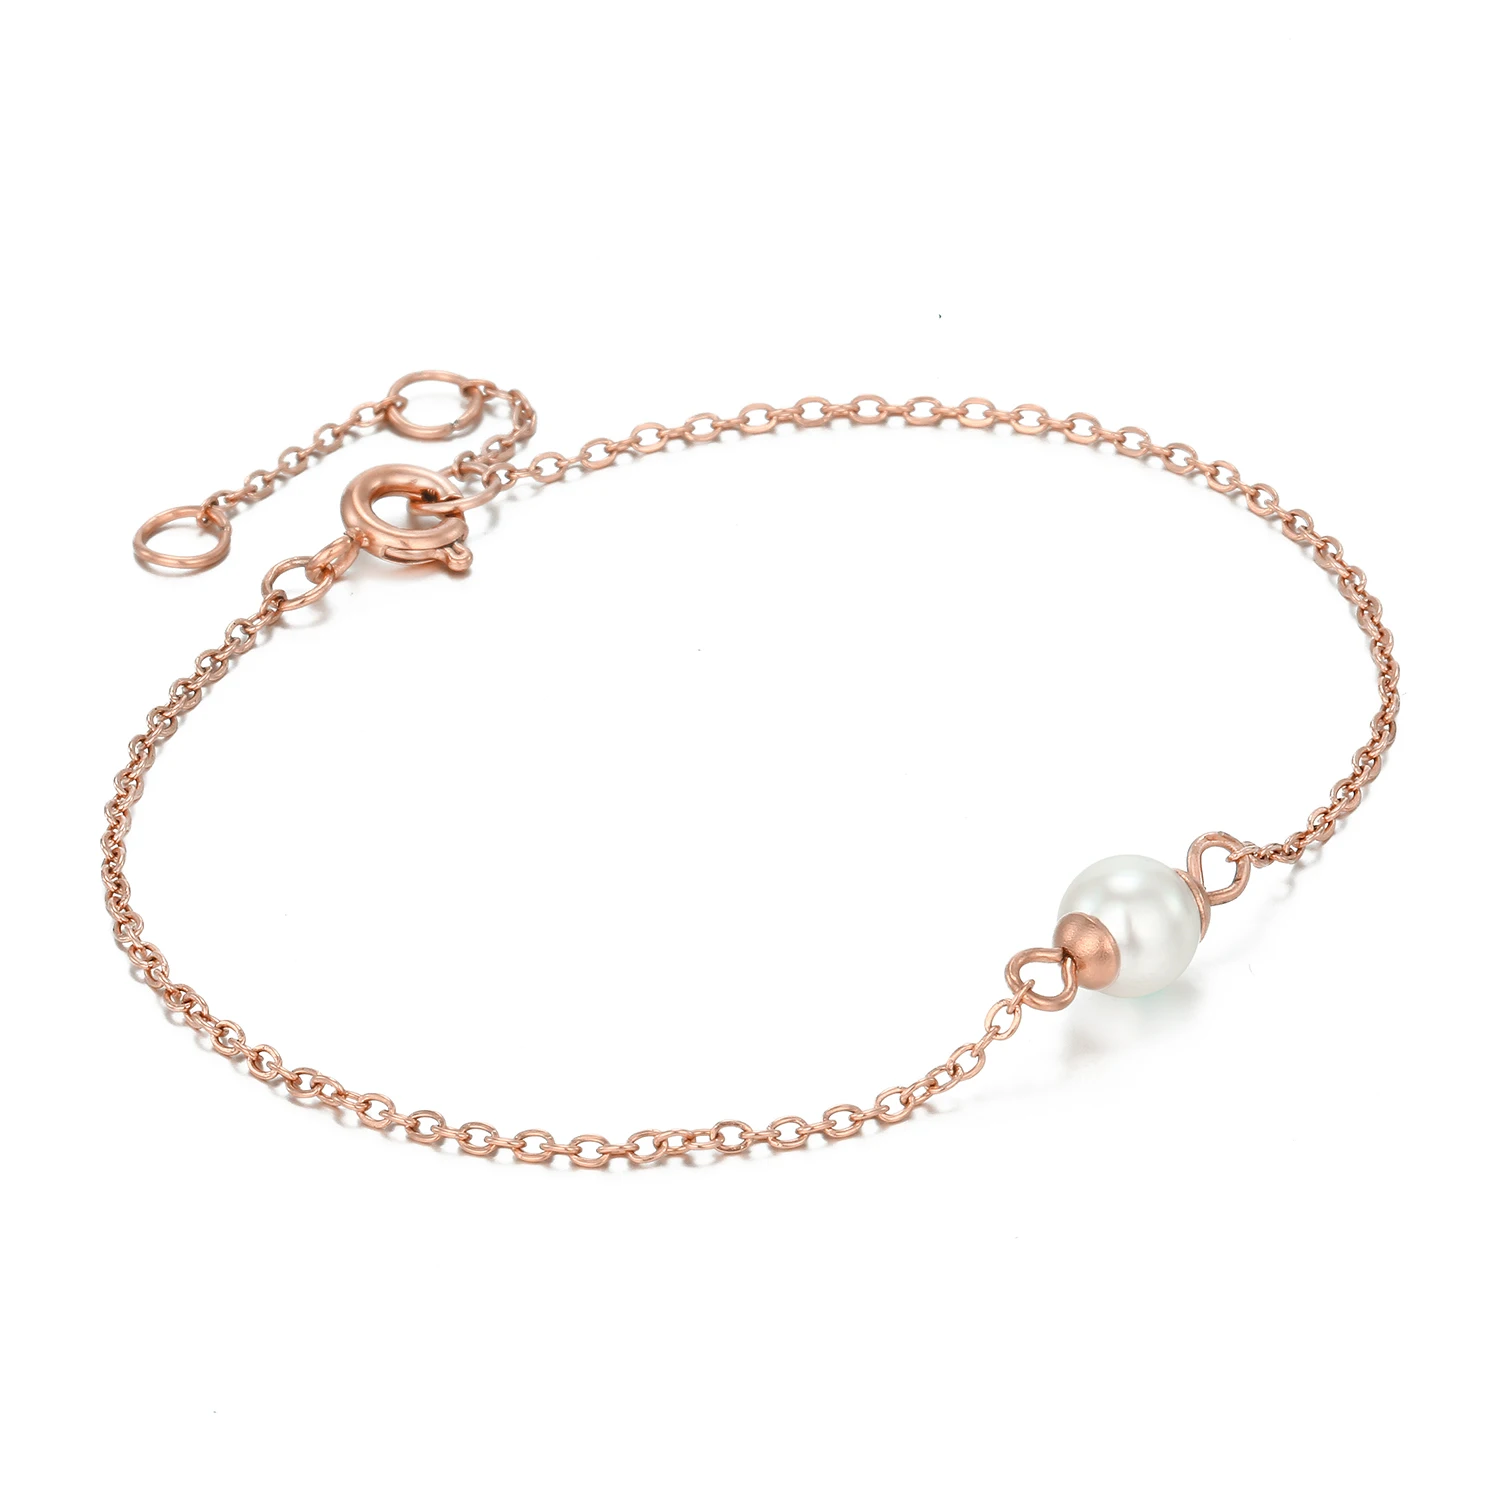 

New Trends in Charm Jewelry Three-color Gold Silver Rose Gold Very Fine Pearl 316 Stainless Steel Chain Bracelets, Silver/gold/rose gold